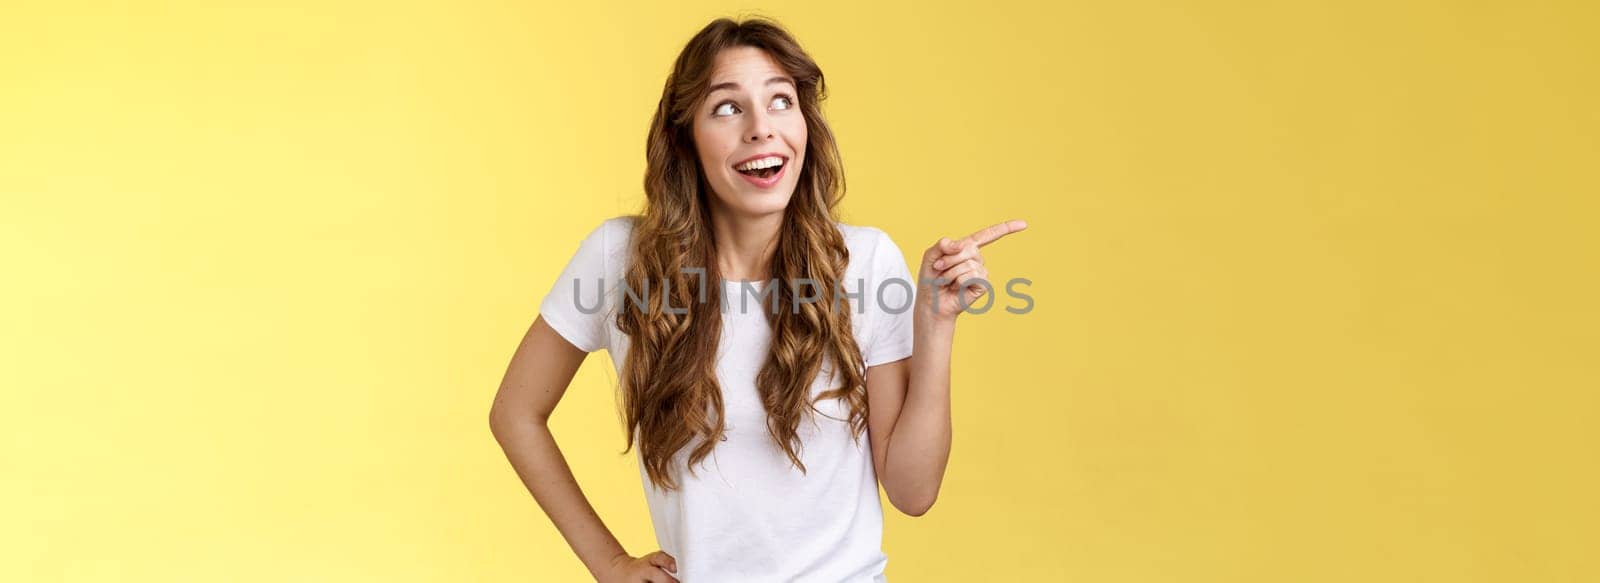 Wondered impressed charismatic fascinated smiling happy girl pointing look upper left corner speechless surprised grinning toothy happiness joy expression contemplate great view yellow background by Benzoix